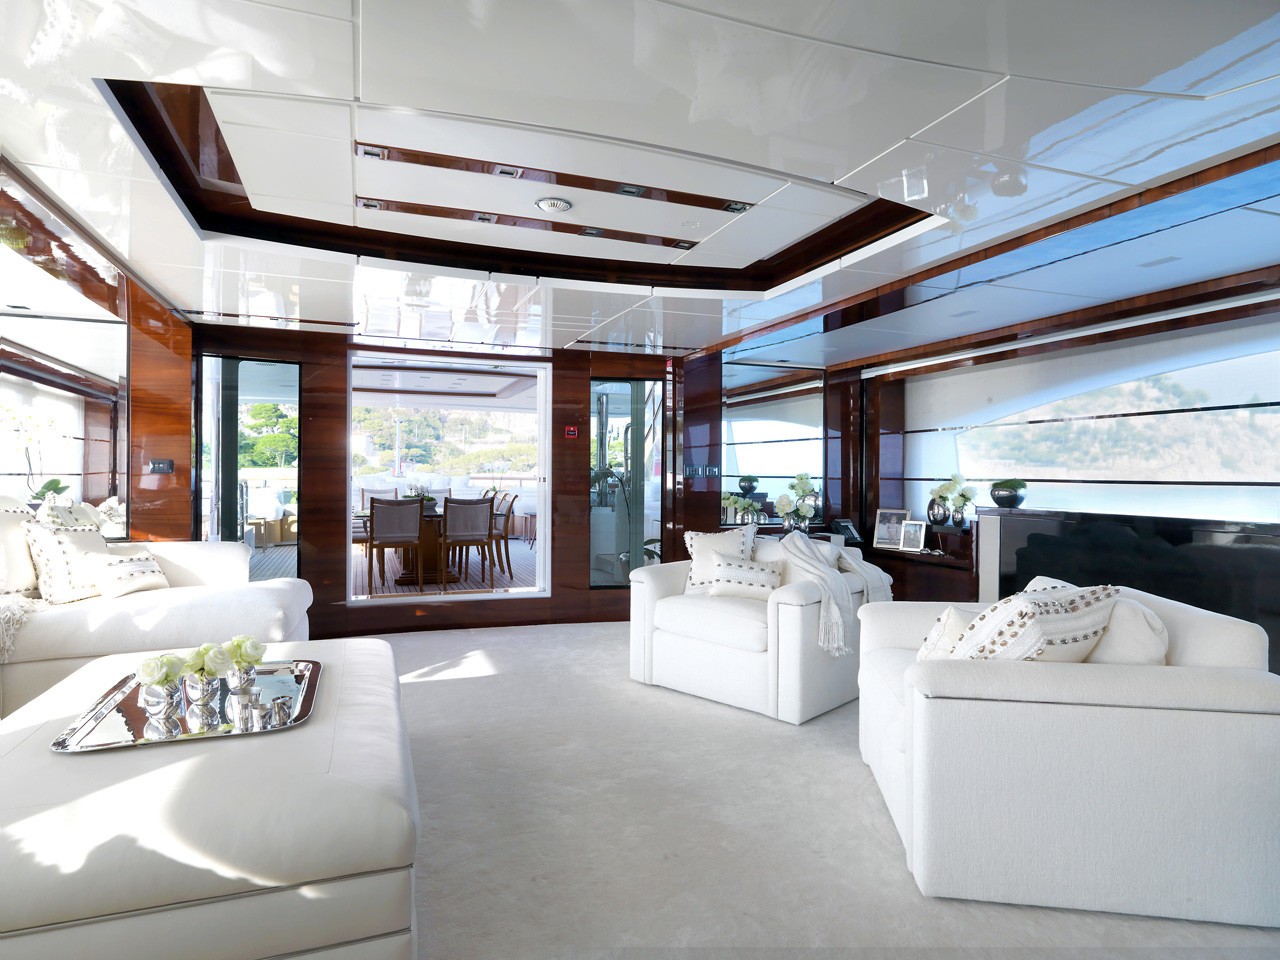 Premier Deck: Yacht WILD ORCHID I's Saloon Pictured